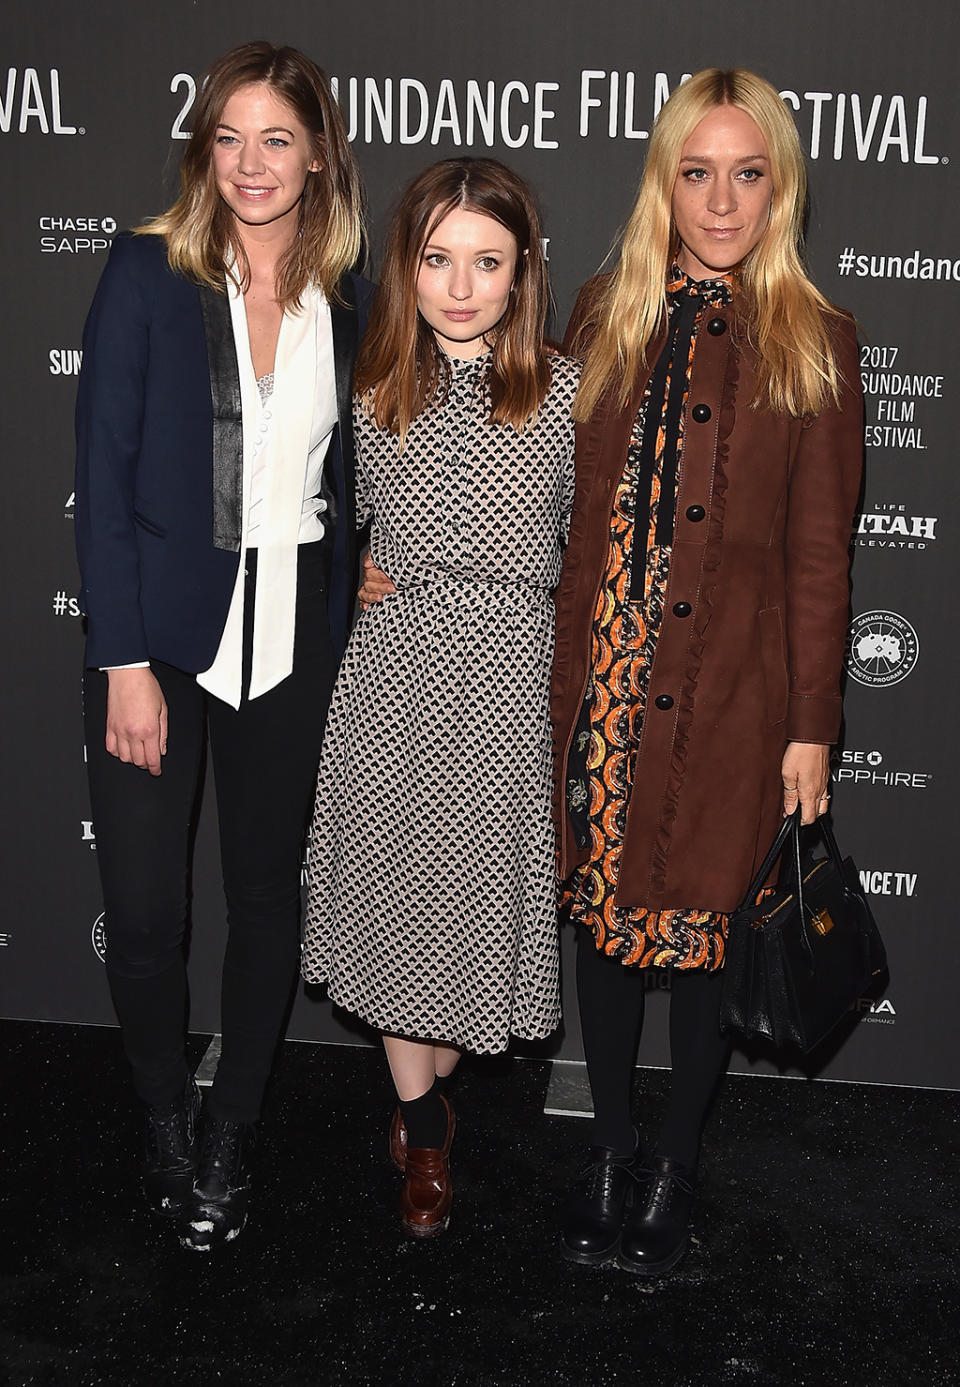 Analeigh Tipton, Emily Browning, and Chloë Sevigny